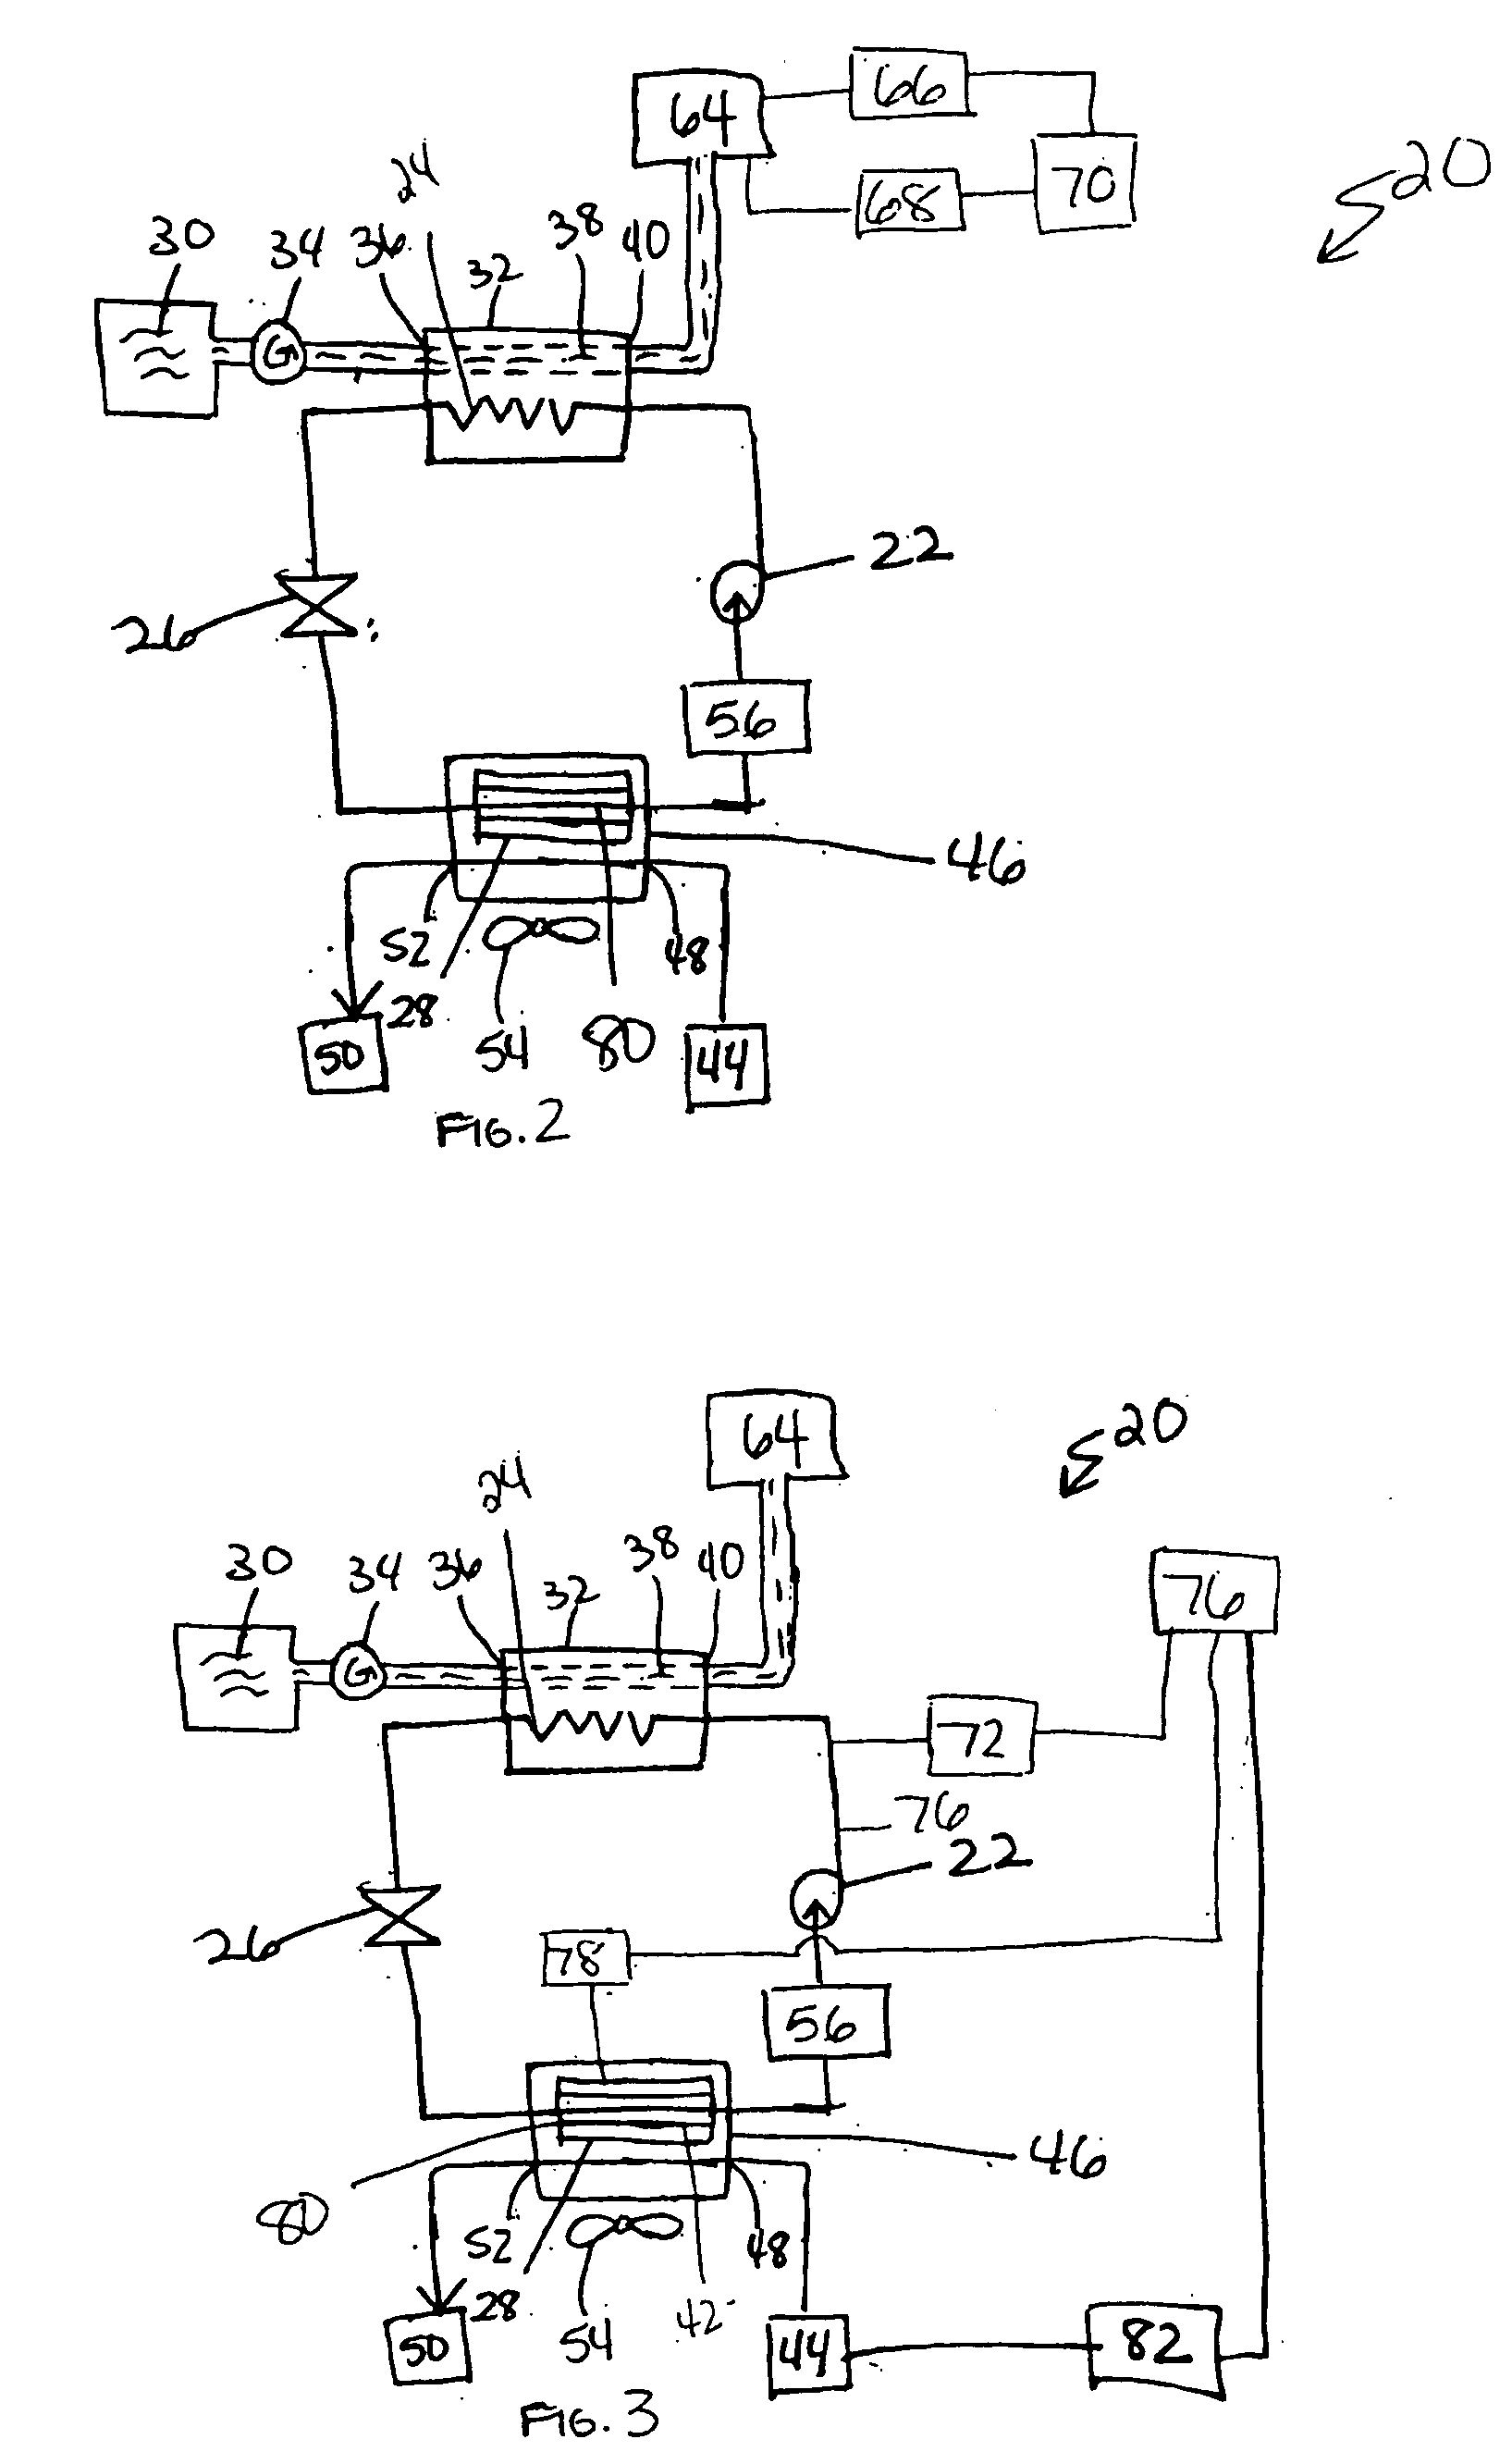 Transcritical heat pump water heating system using auxiliary electric heater